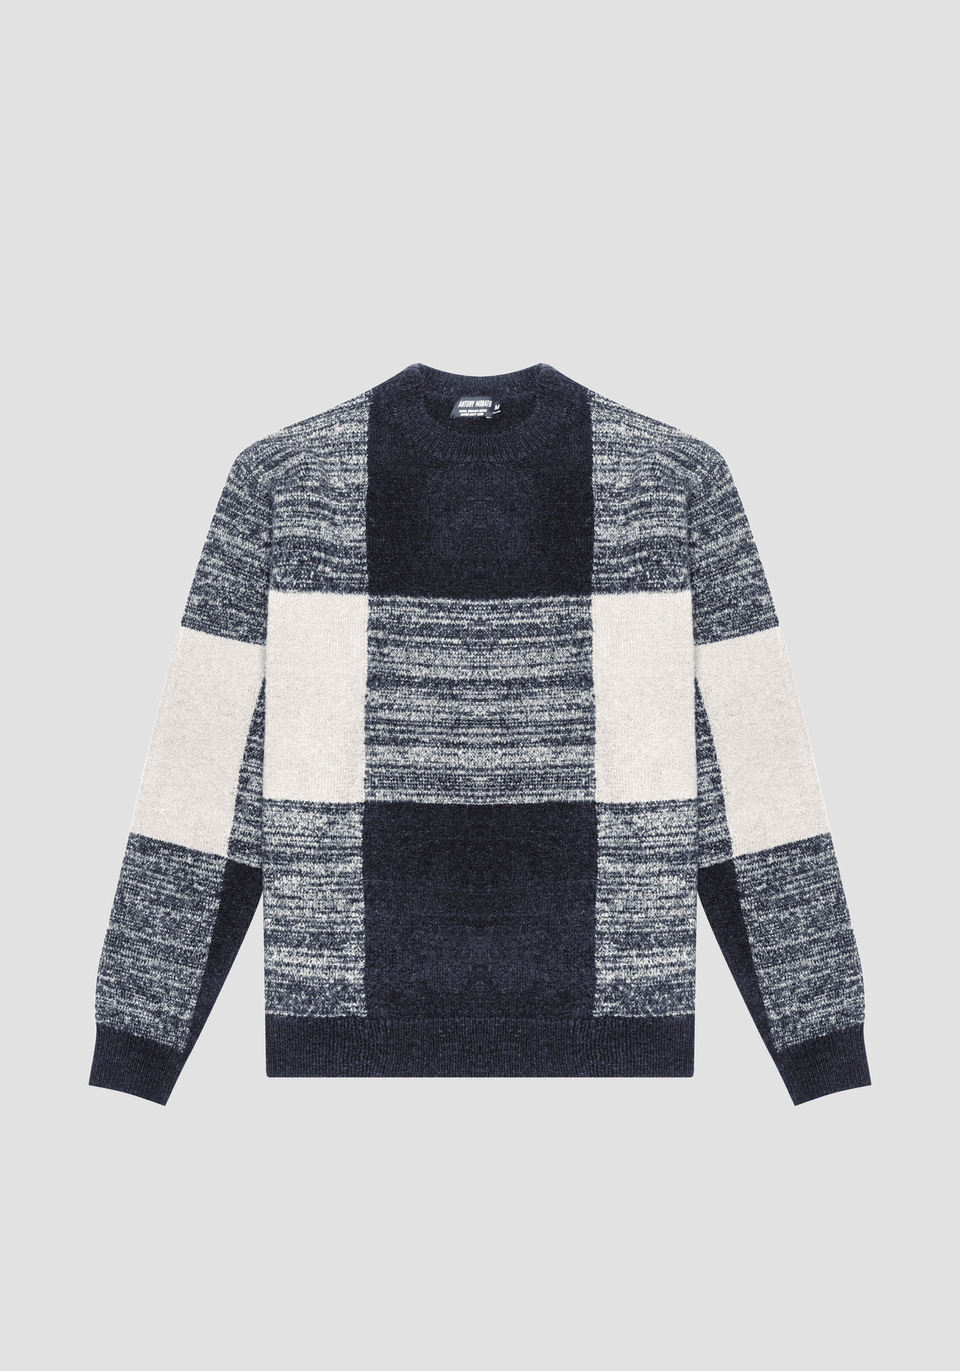 REGULAR FIT SWEATER IN MOHAIR BLEND YARN WITH JACQUARD 	CHECK PATTERN - Antony Morato Online Shop